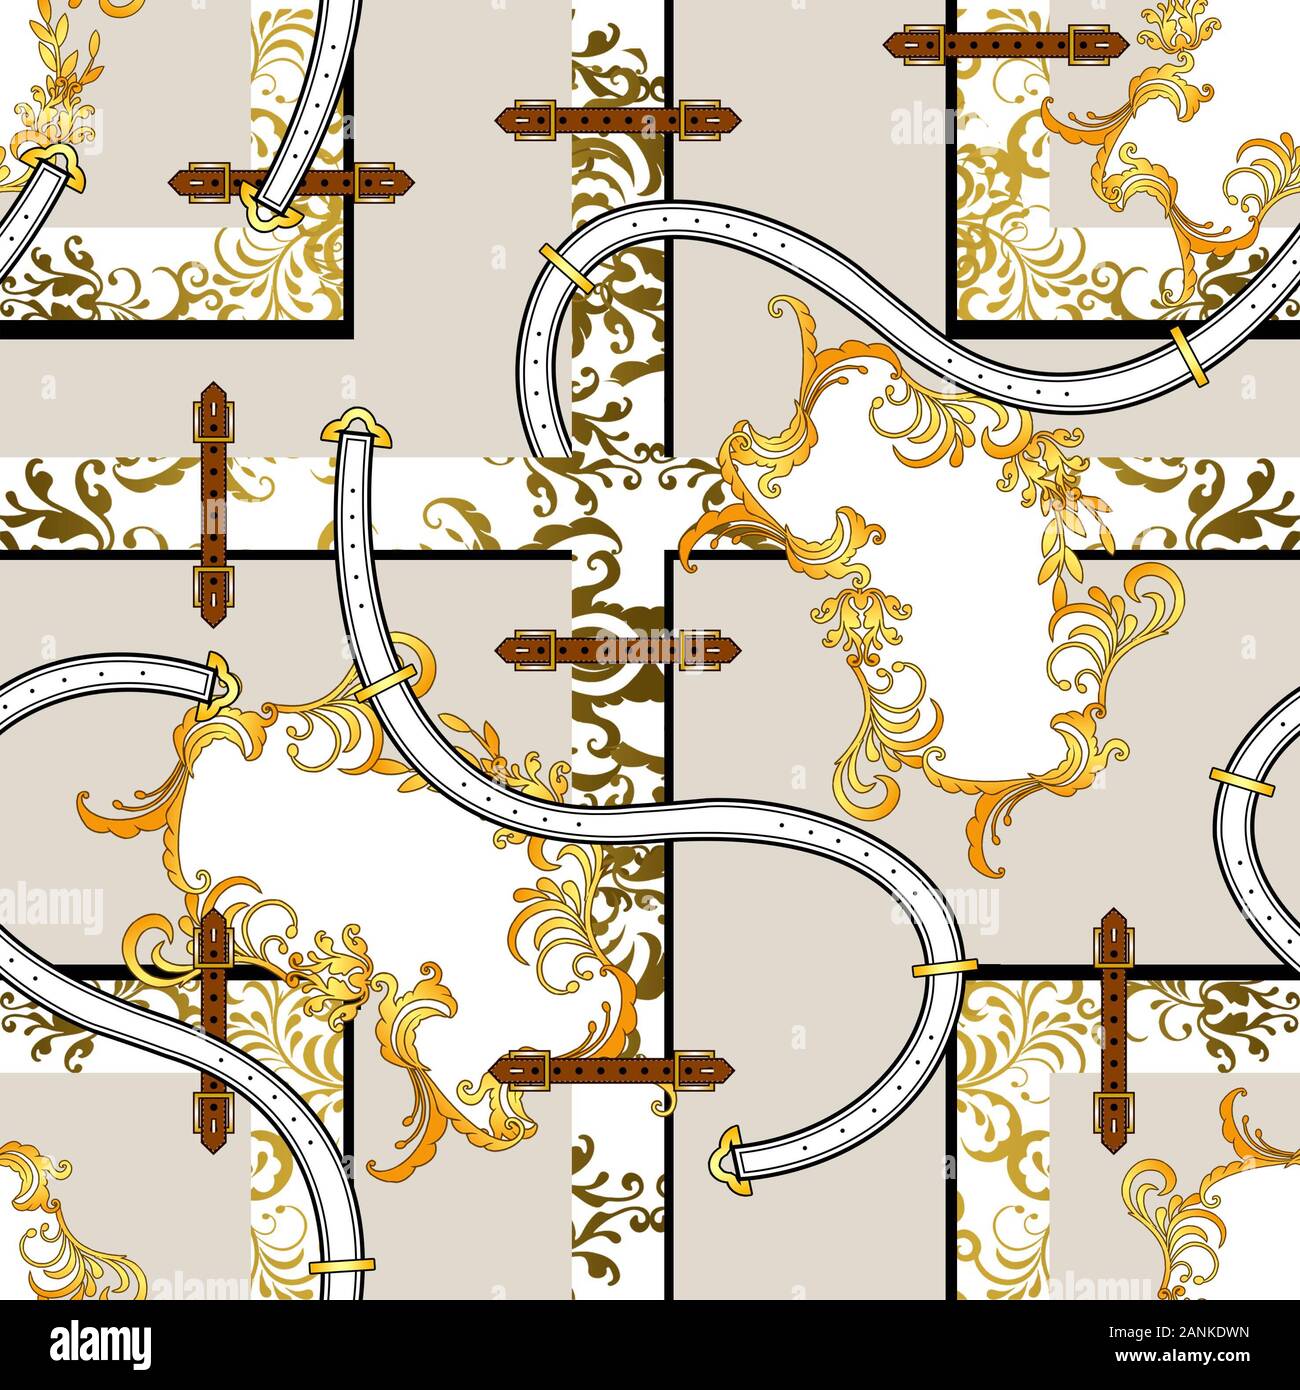 Gold baroque pattern with floral pattern, belts. Geometric background. Seamless paisley print for fabric. Fashion elements. Textile figures. Stock Photo